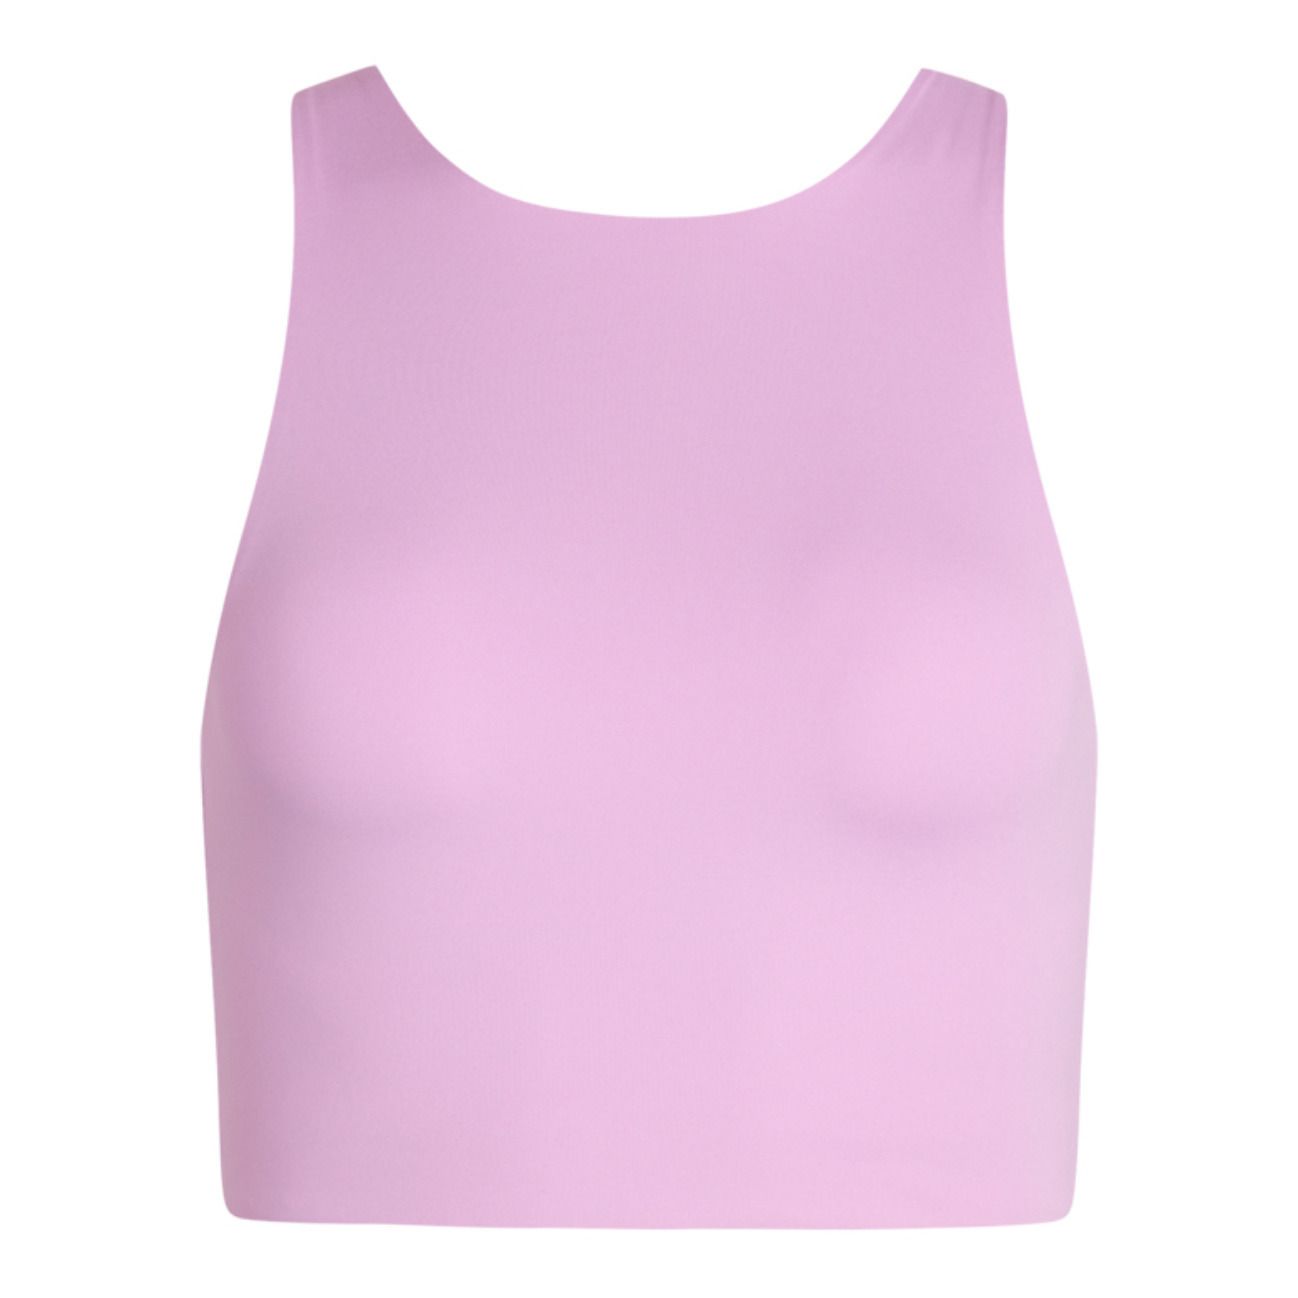 Girlfriend Collective - Brassière Dylan - Femme - Lilas